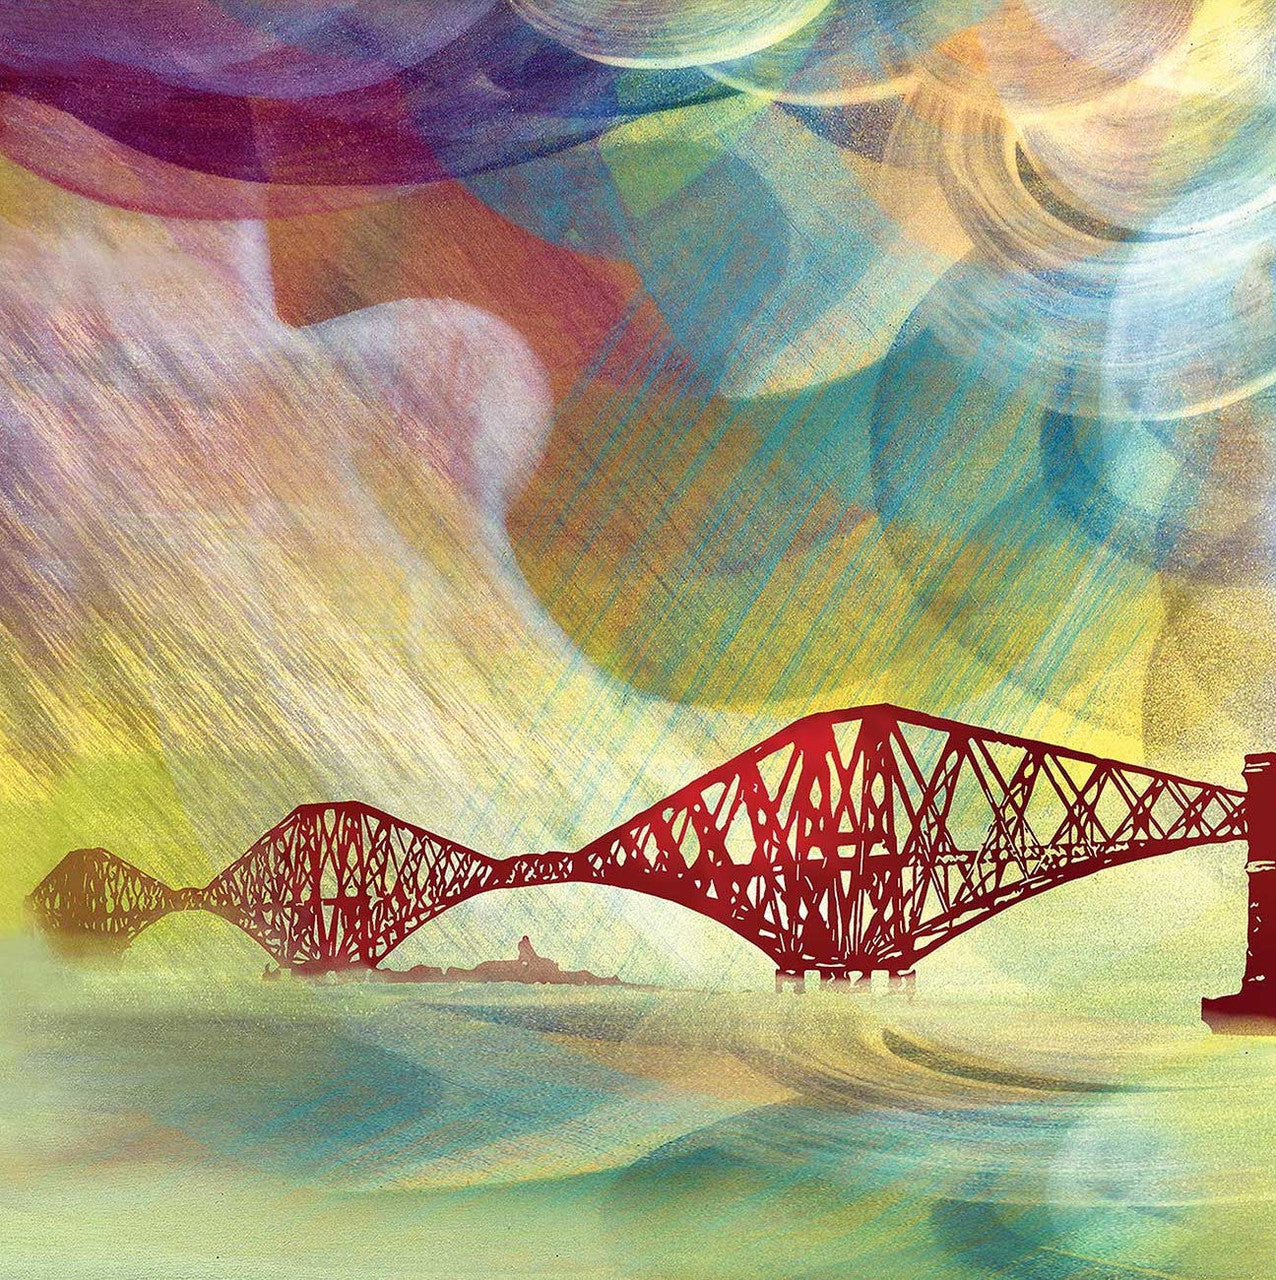 Tartan Skies over Forth Bridge by Esther Cohen